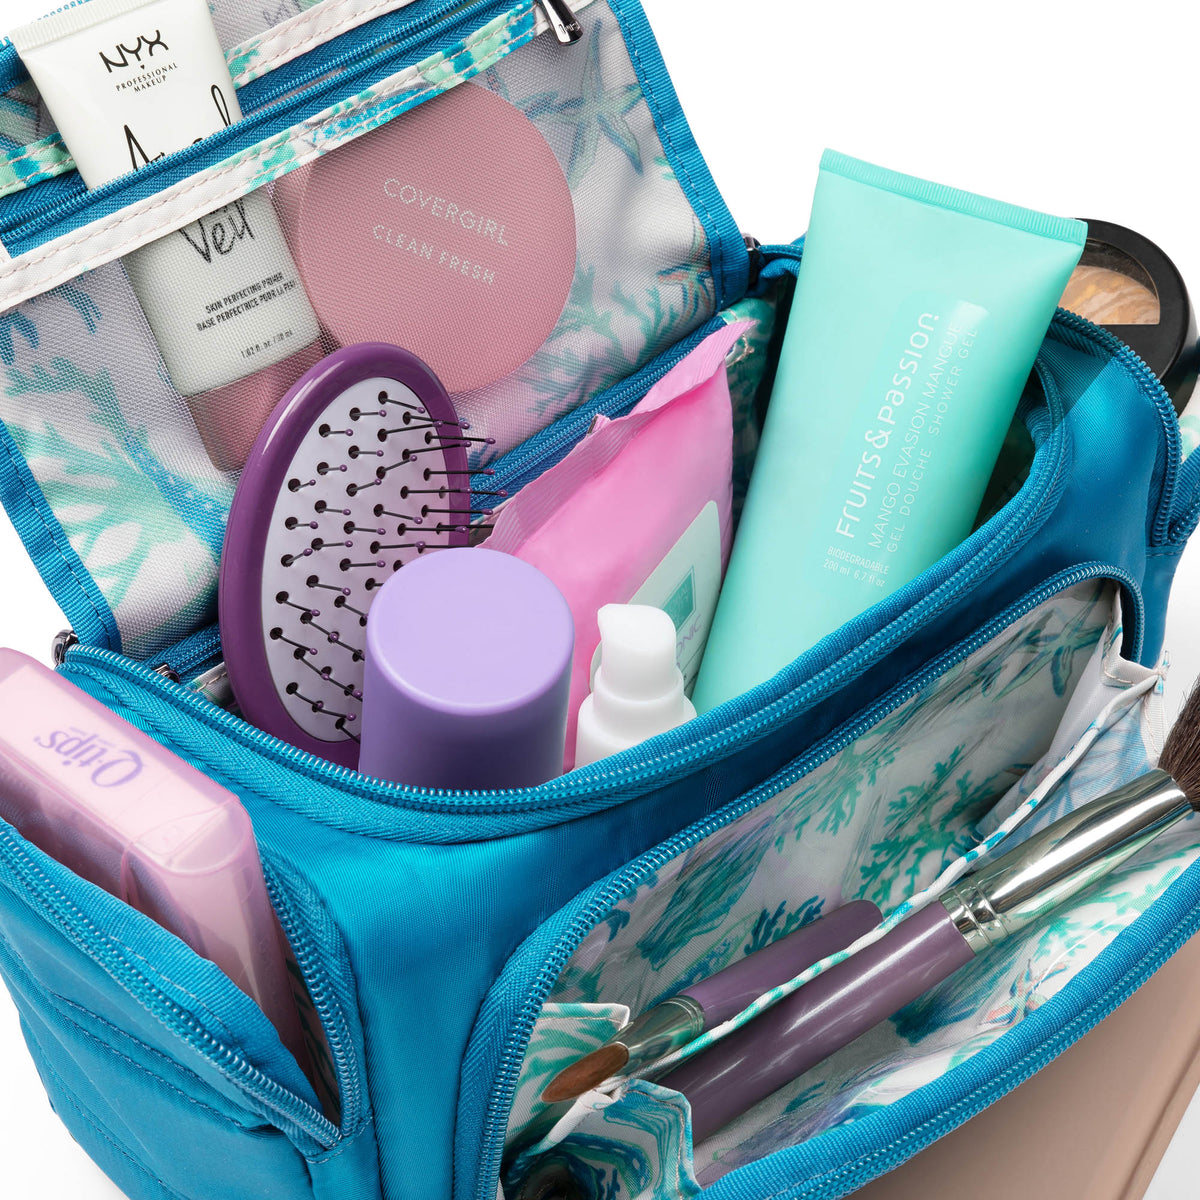 Toiletry Bags & Cosmetic Cases